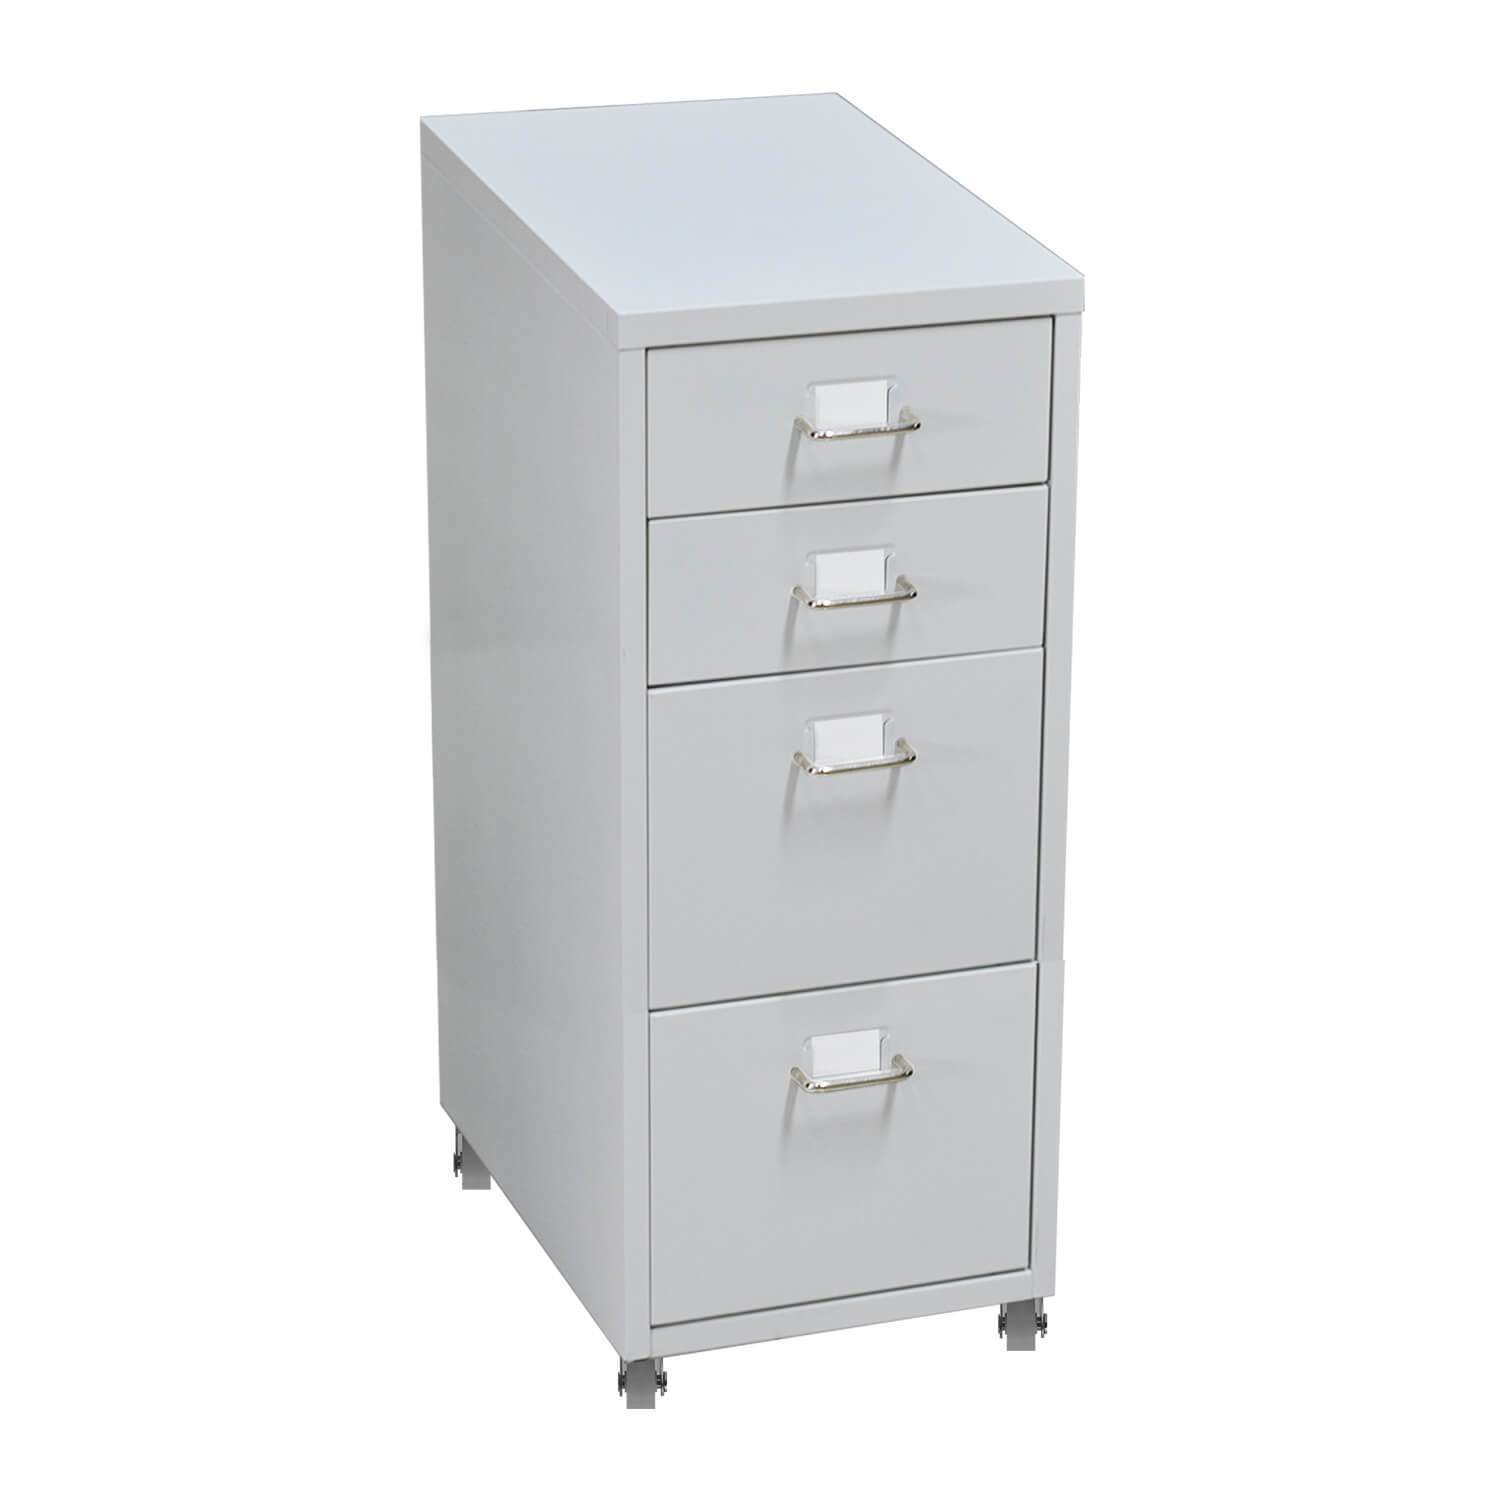 office & study 4 Tiers Steel Orgainer Metal File Cabinet With Drawers Office Furniture White